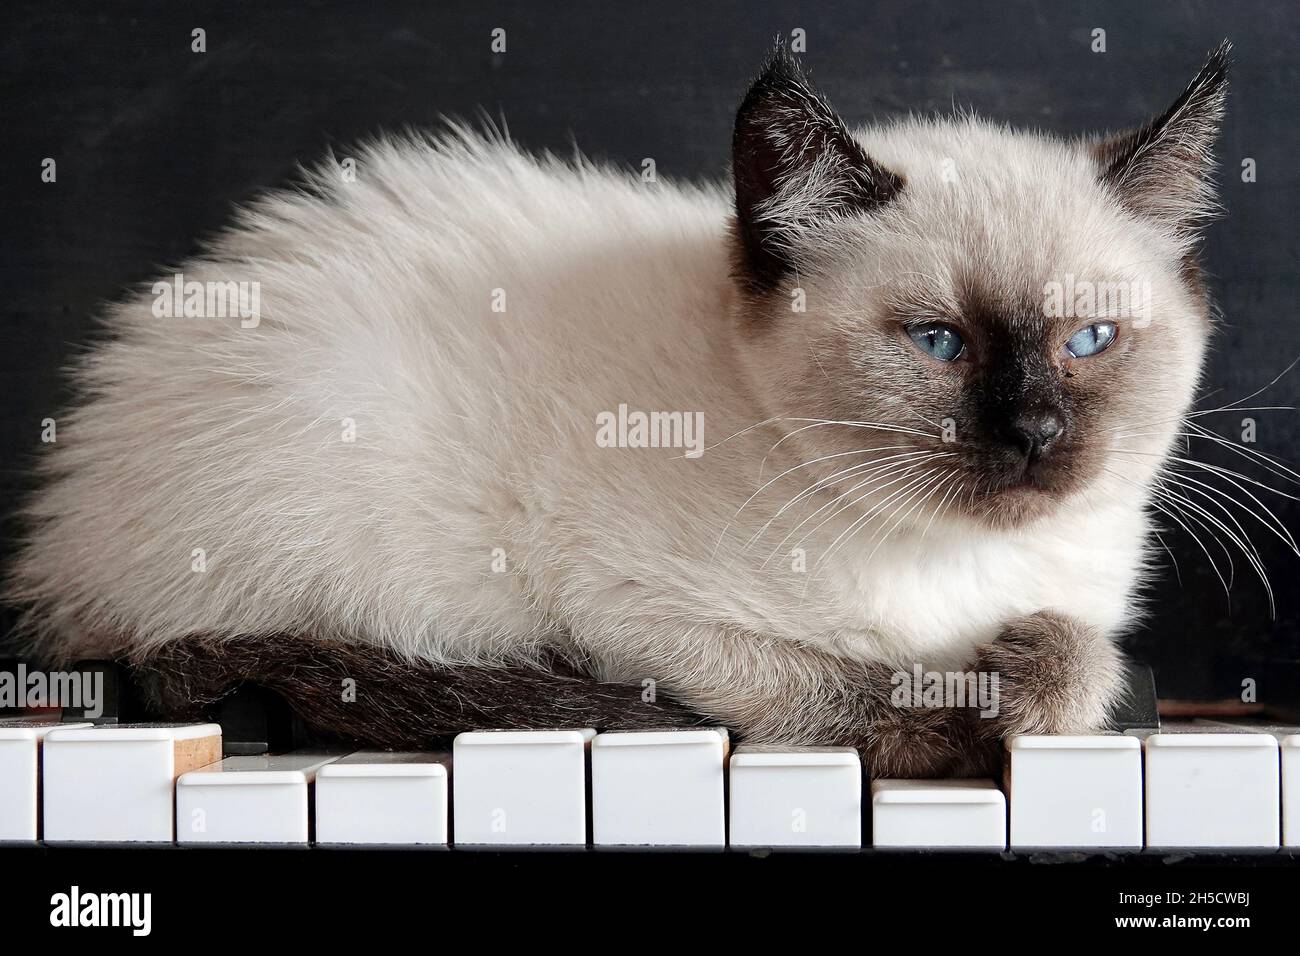 A white cat with blue eyes looks to the side while sitting on the keys of a piano. Stock Photo